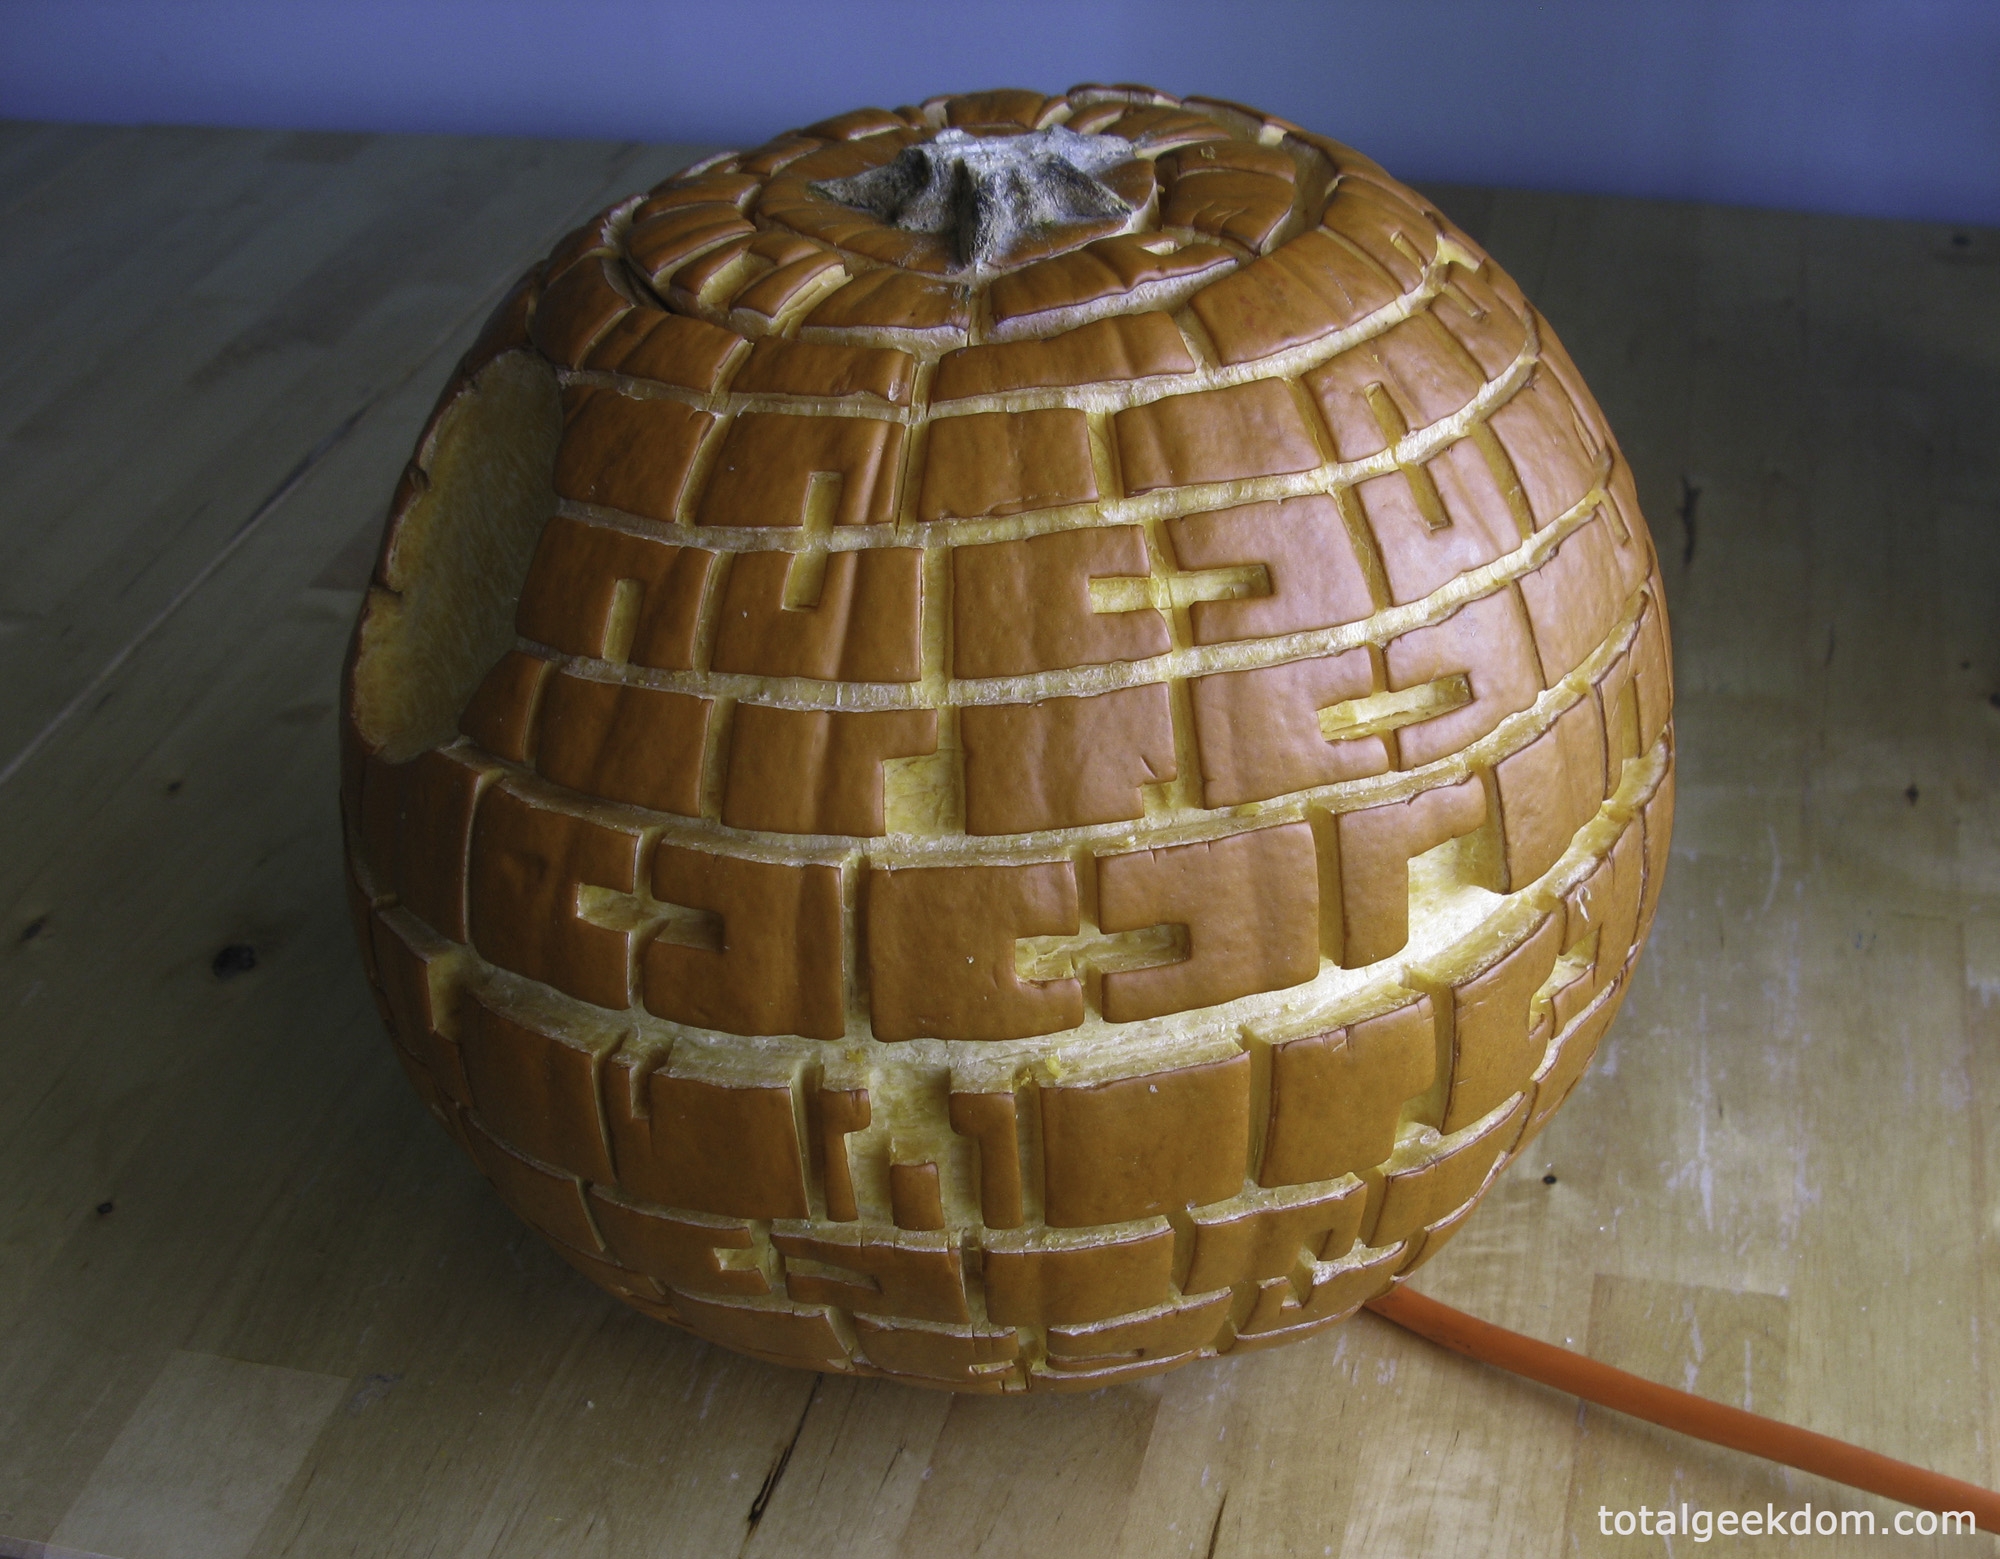 Star Wars Death Star Pumpkin Carving With CFL Powered Bulb Total Geekdom